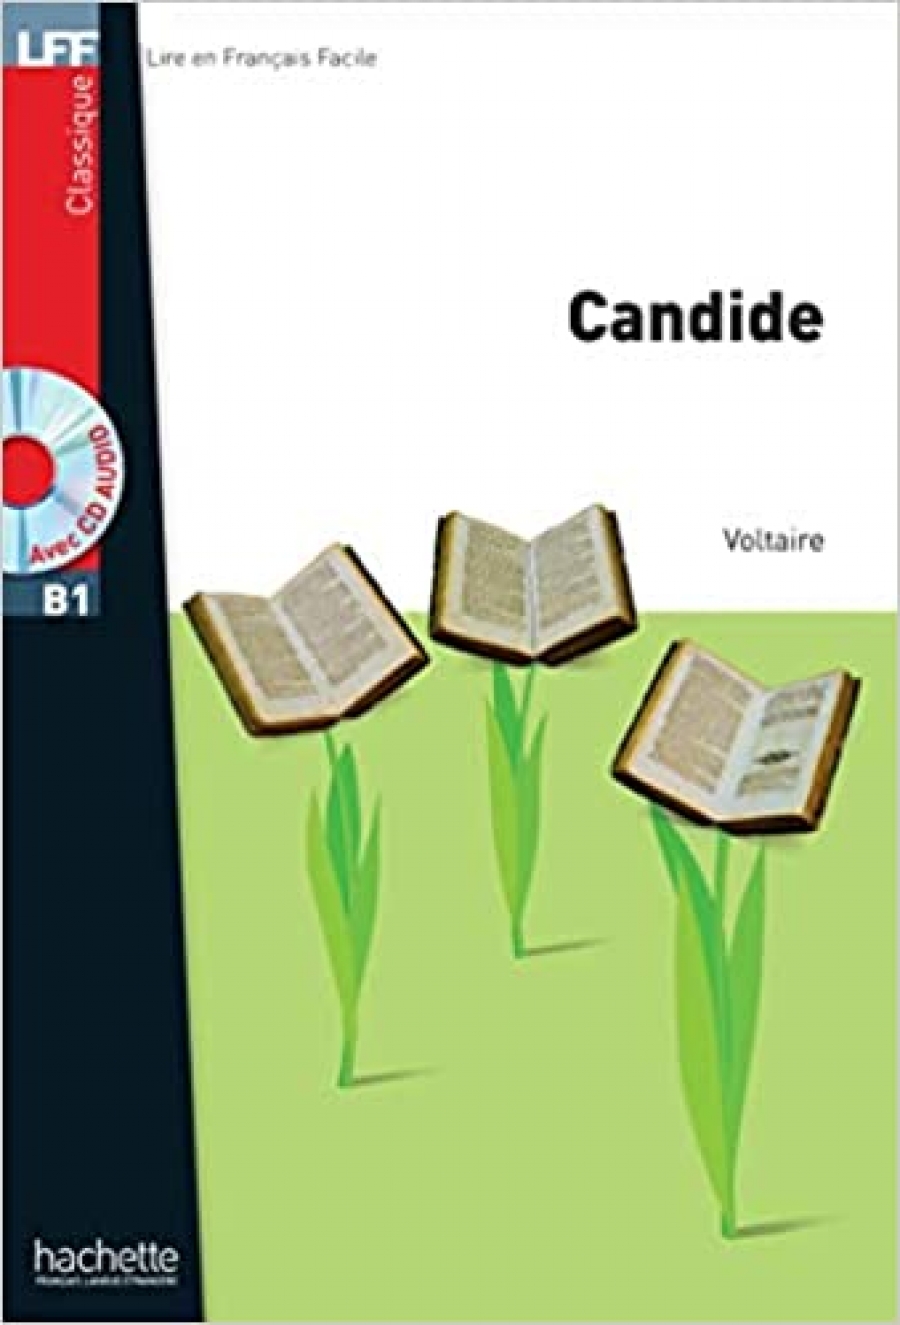 Voltaire Candide + CD audio MP3, B1 